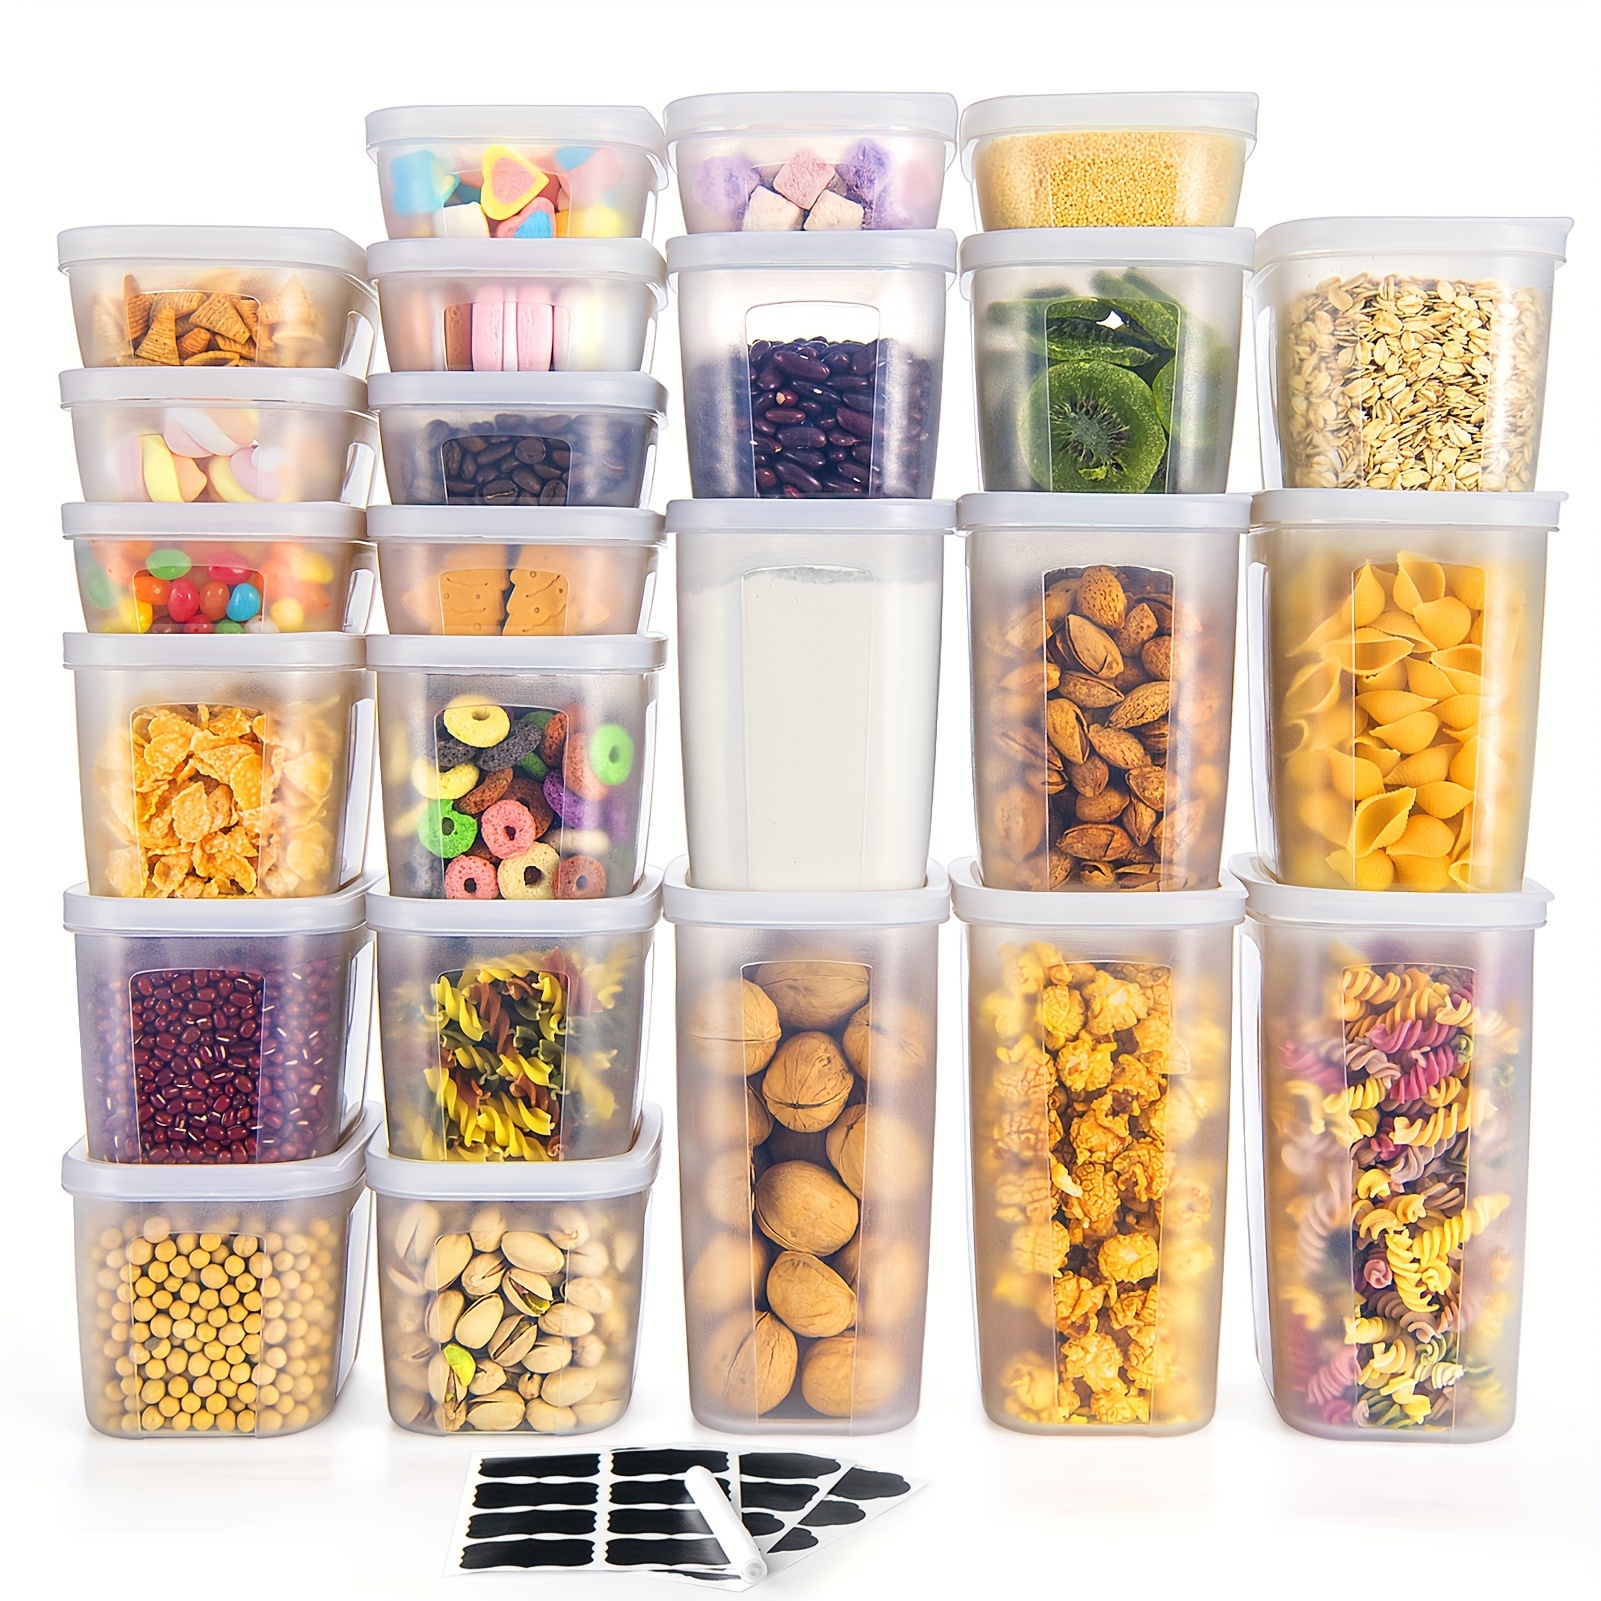 

24 Pack Airtight Food Storage Containers With Lids For Kitchen Pantry Organization And Storage, Bpa Free, Plastic Canister Set For Cereal, Pasta, Flour & Sugar, Labels & Marker